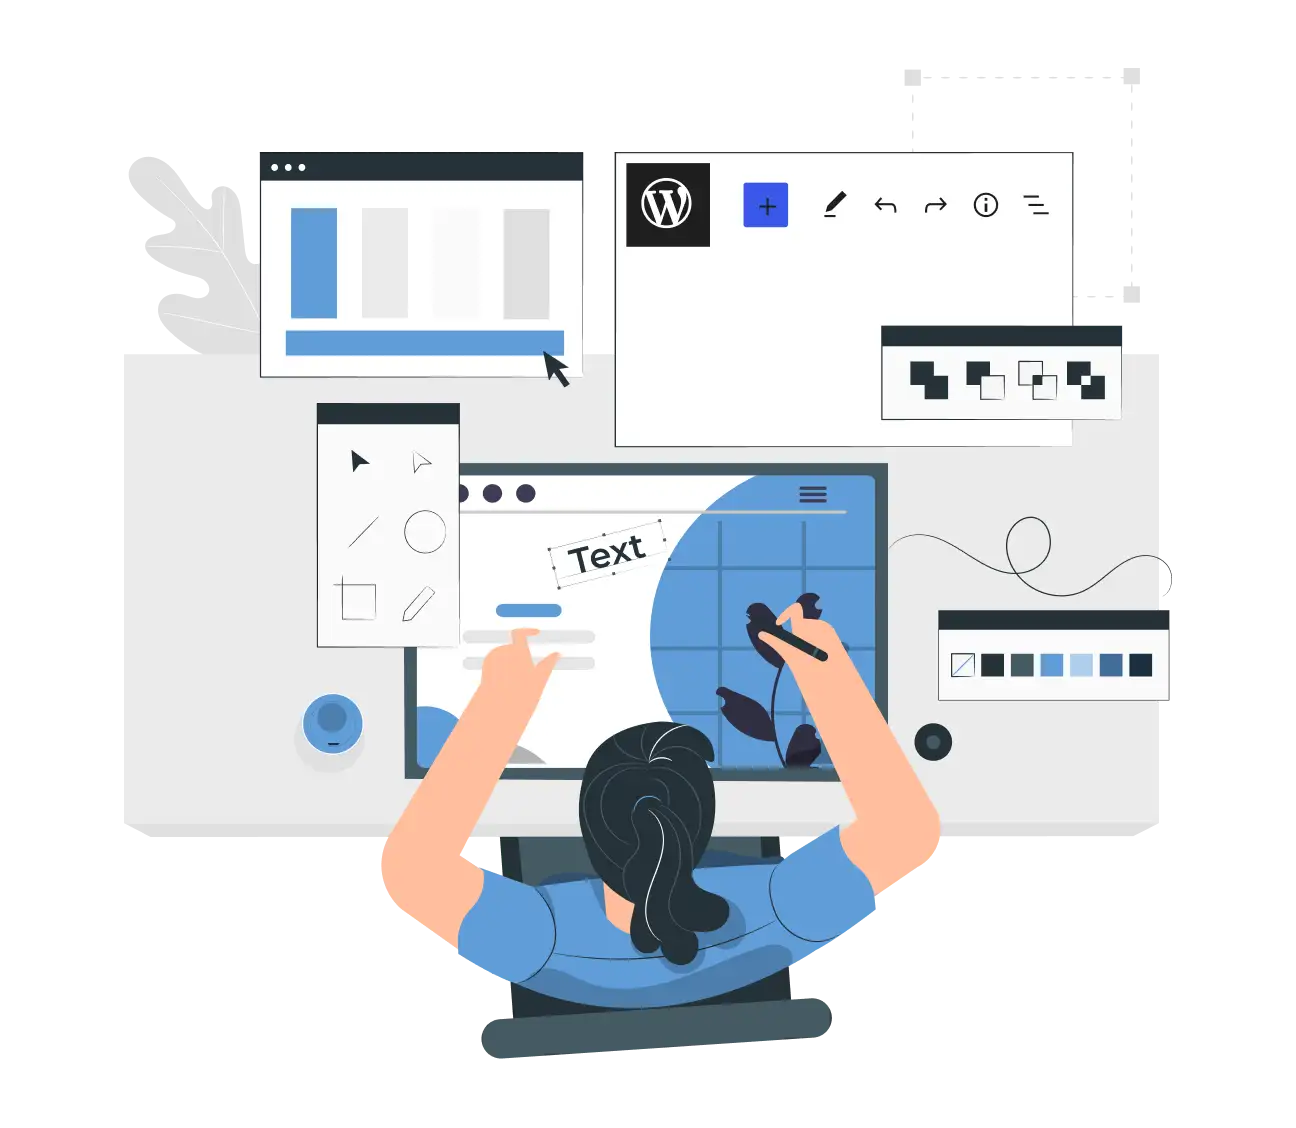 Featured Image: How UI/UX works for WordPress